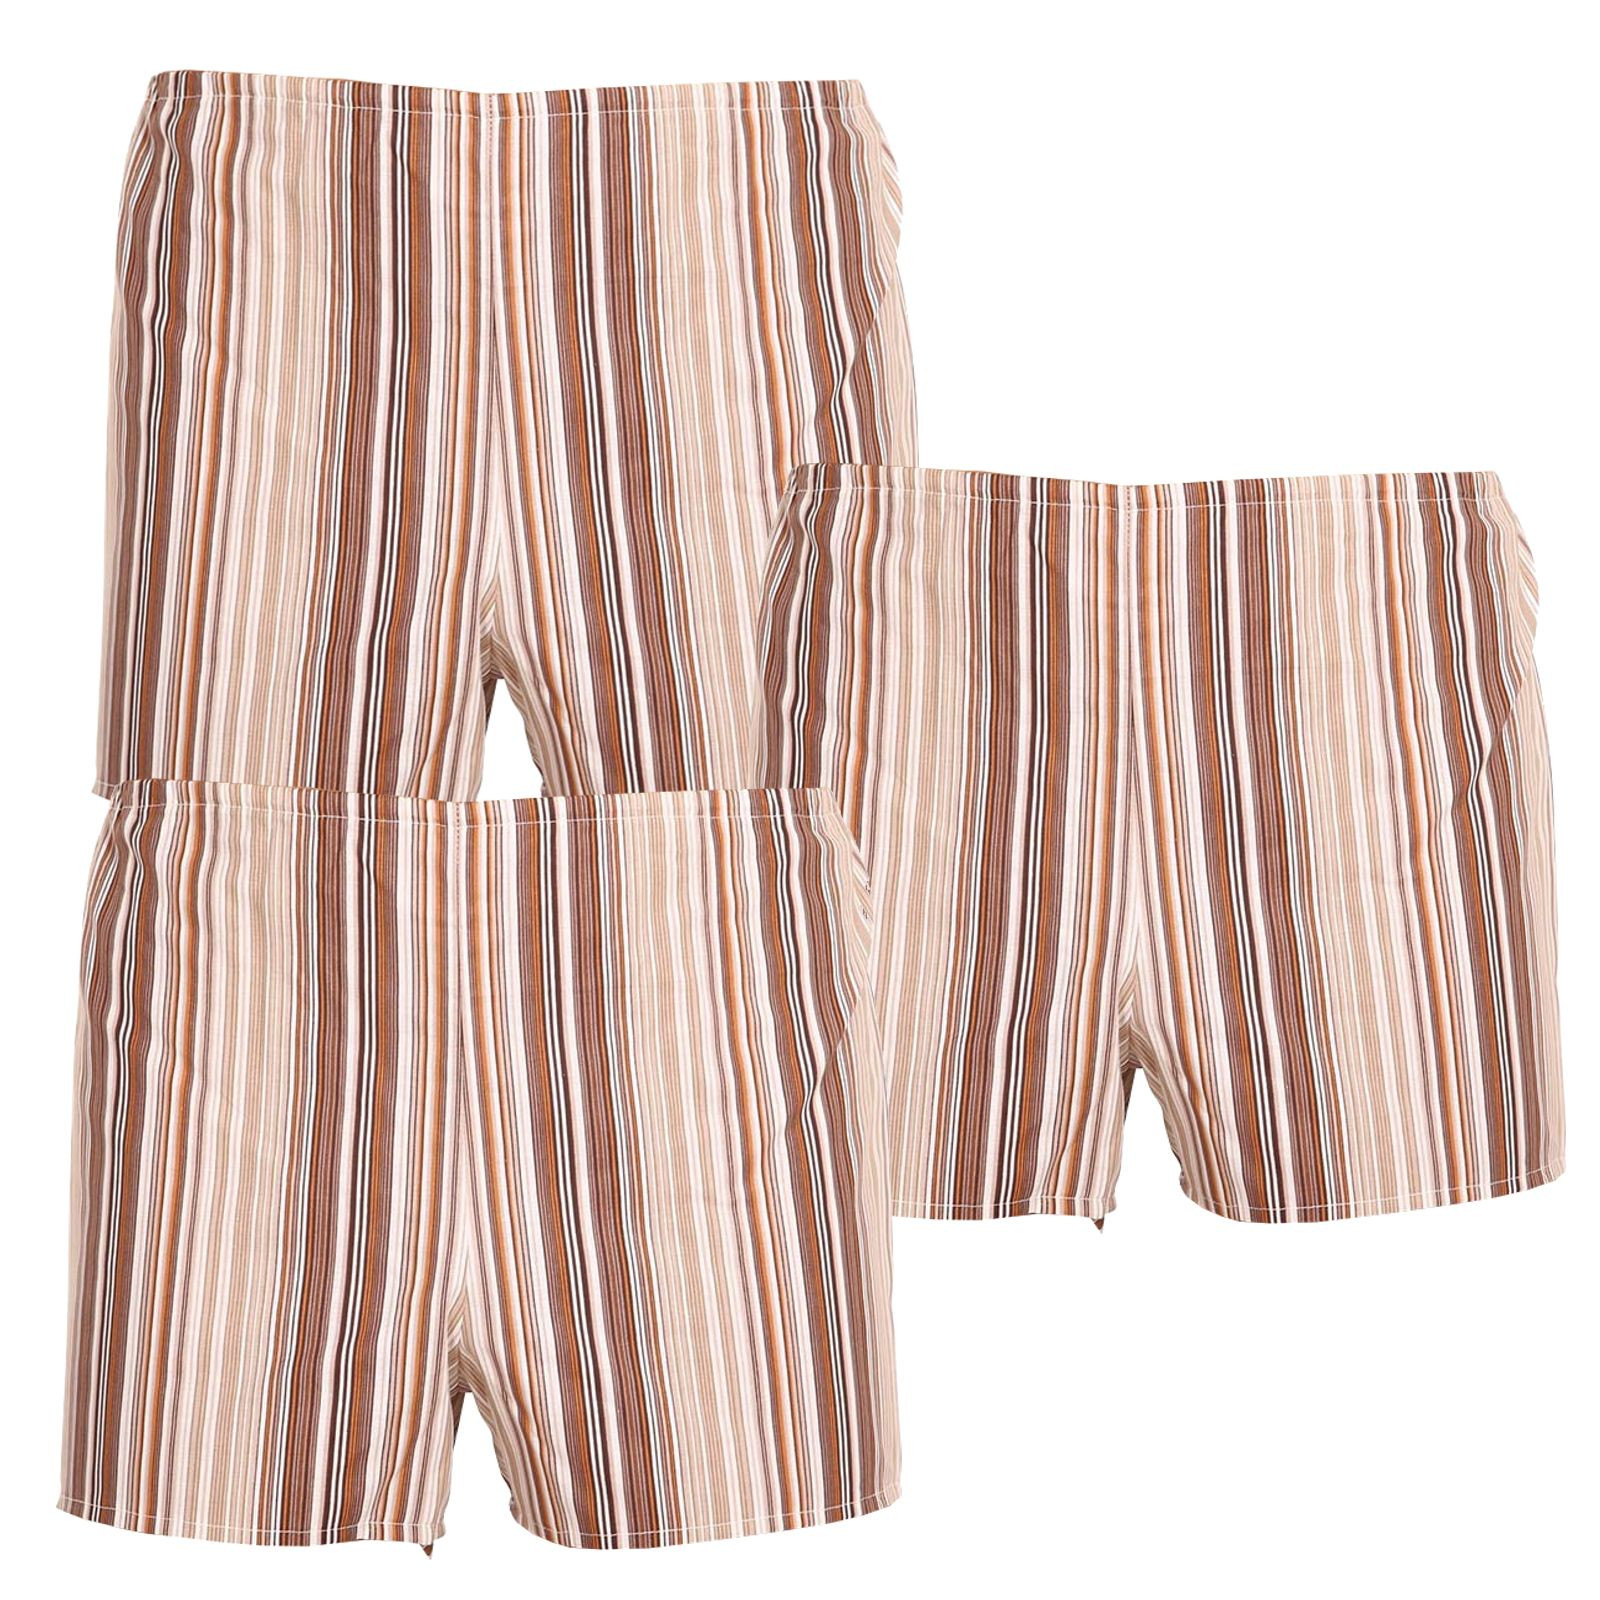 3PACK Men's Classic Foltýn Shorts brown with stripes